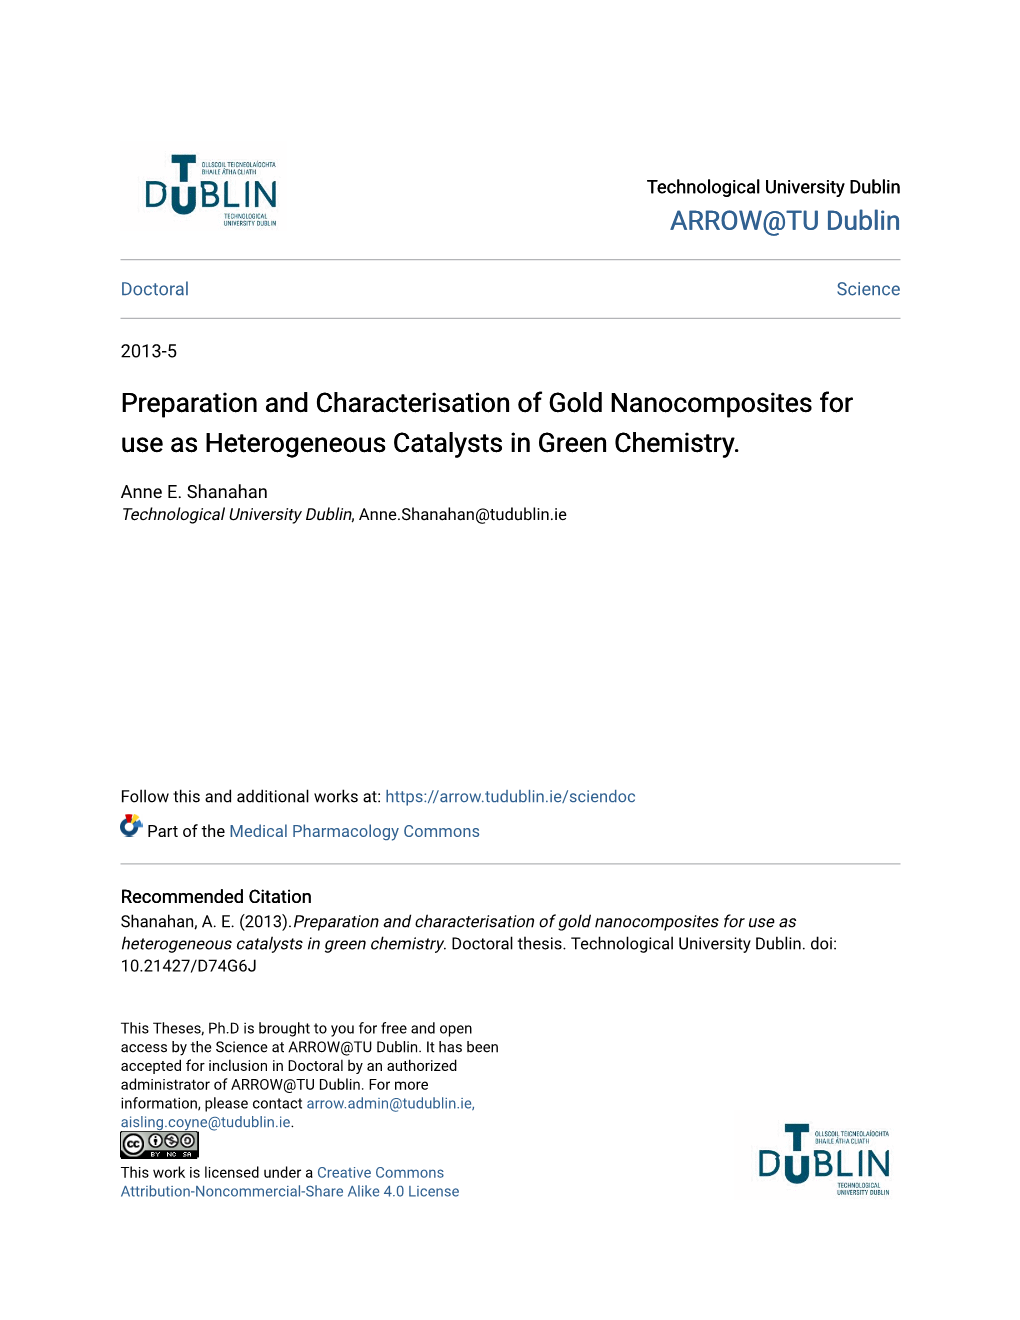 Preparation and Characterisation of Gold Nanocomposites for Use As Heterogeneous Catalysts in Green Chemistry